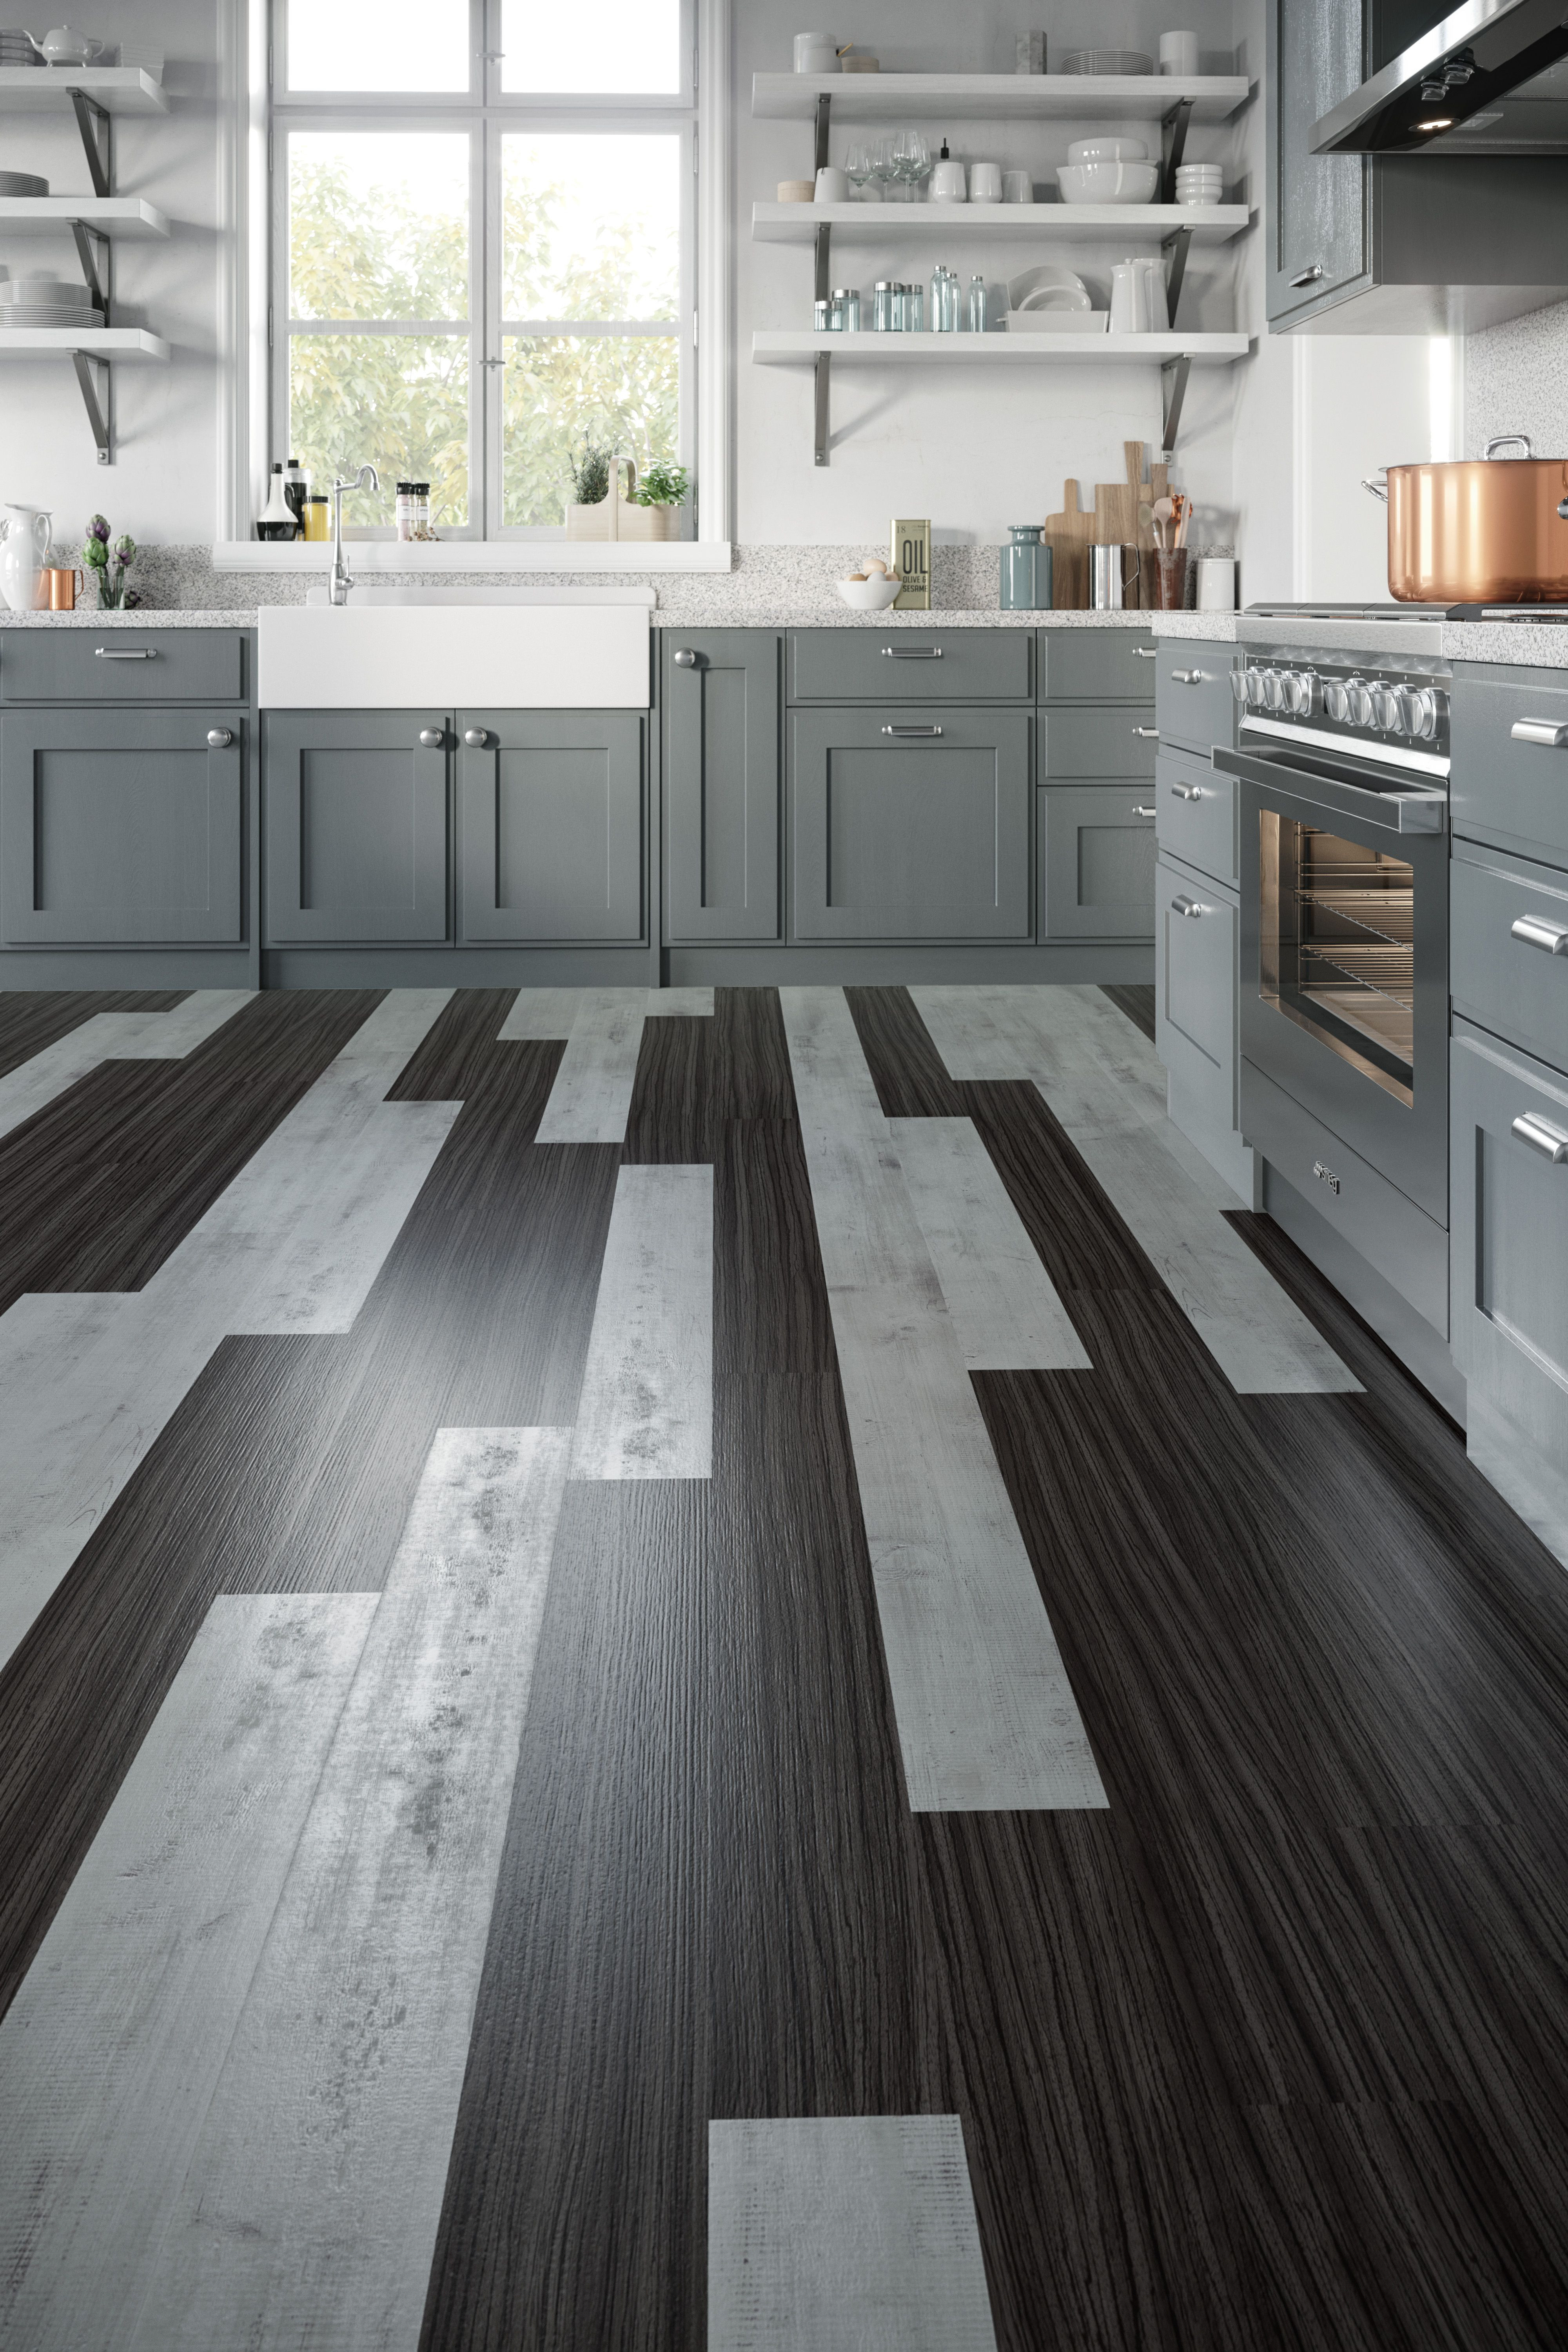 hardwood floor solutions of featuring luxury vinyl plank and tile point of view from our design intended for featuring luxury vinyl plank and tile point of view from our design mix flooring solution